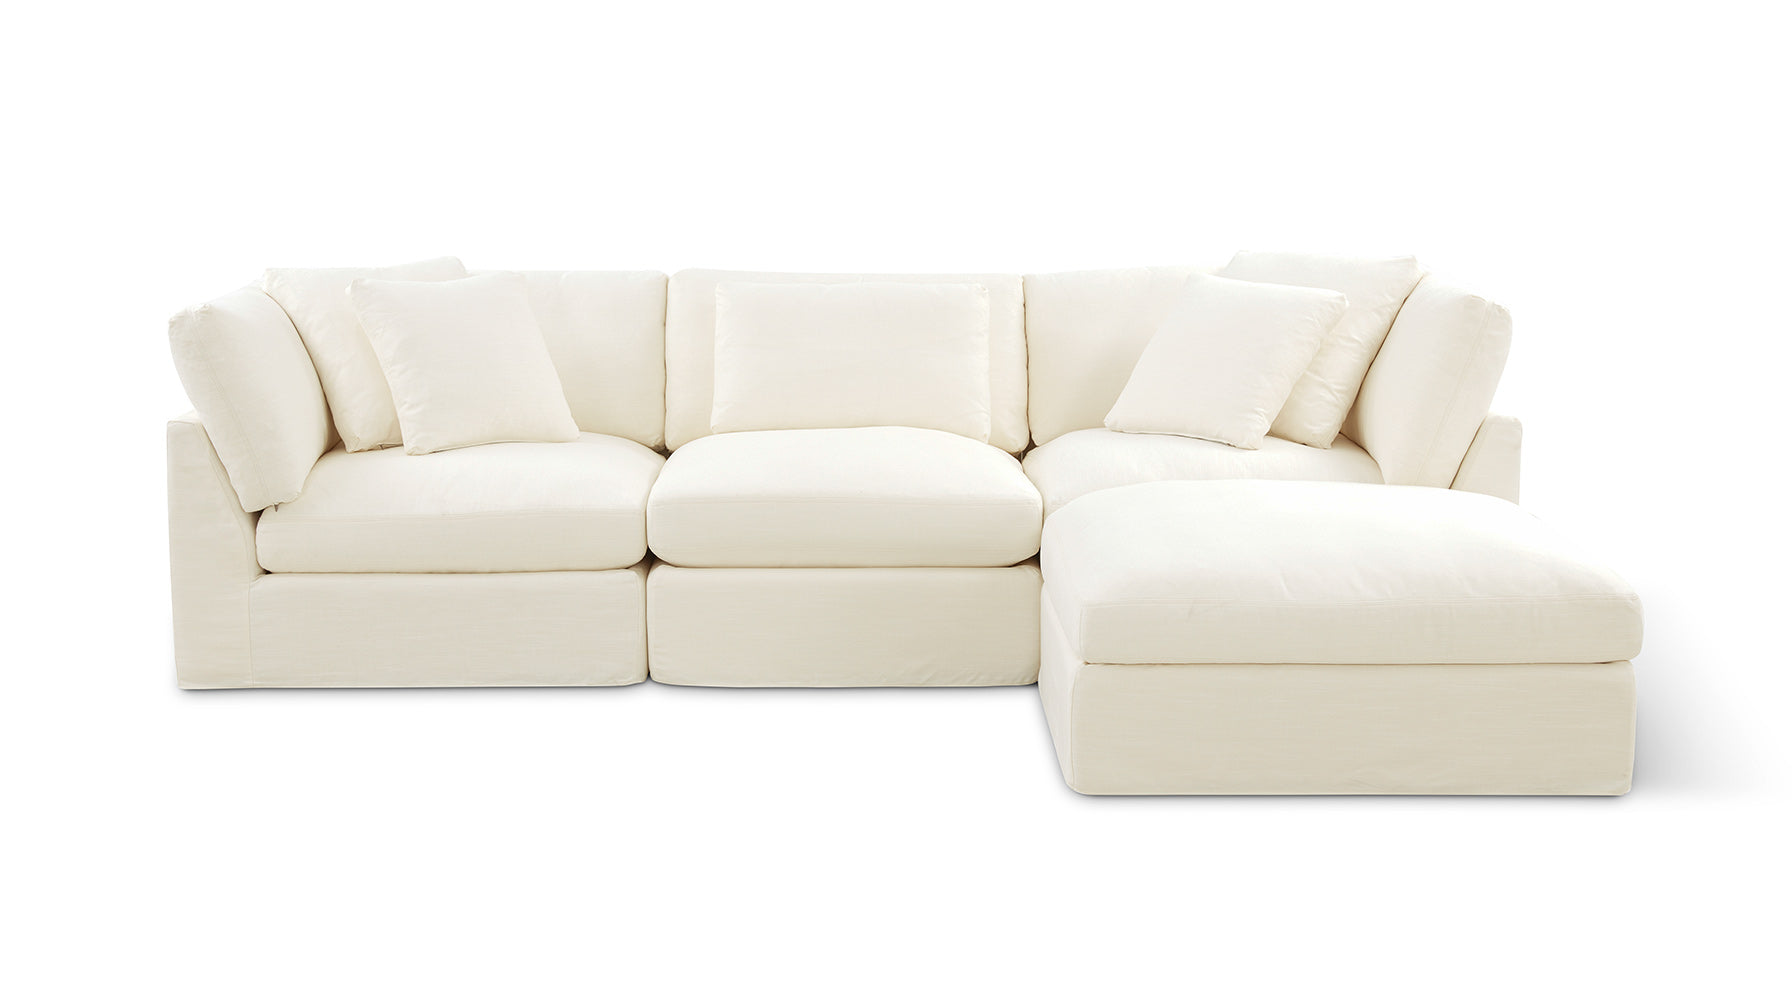 Get Together™ 4-Piece Modular Sectional, Large, Cream Linen - Image 1